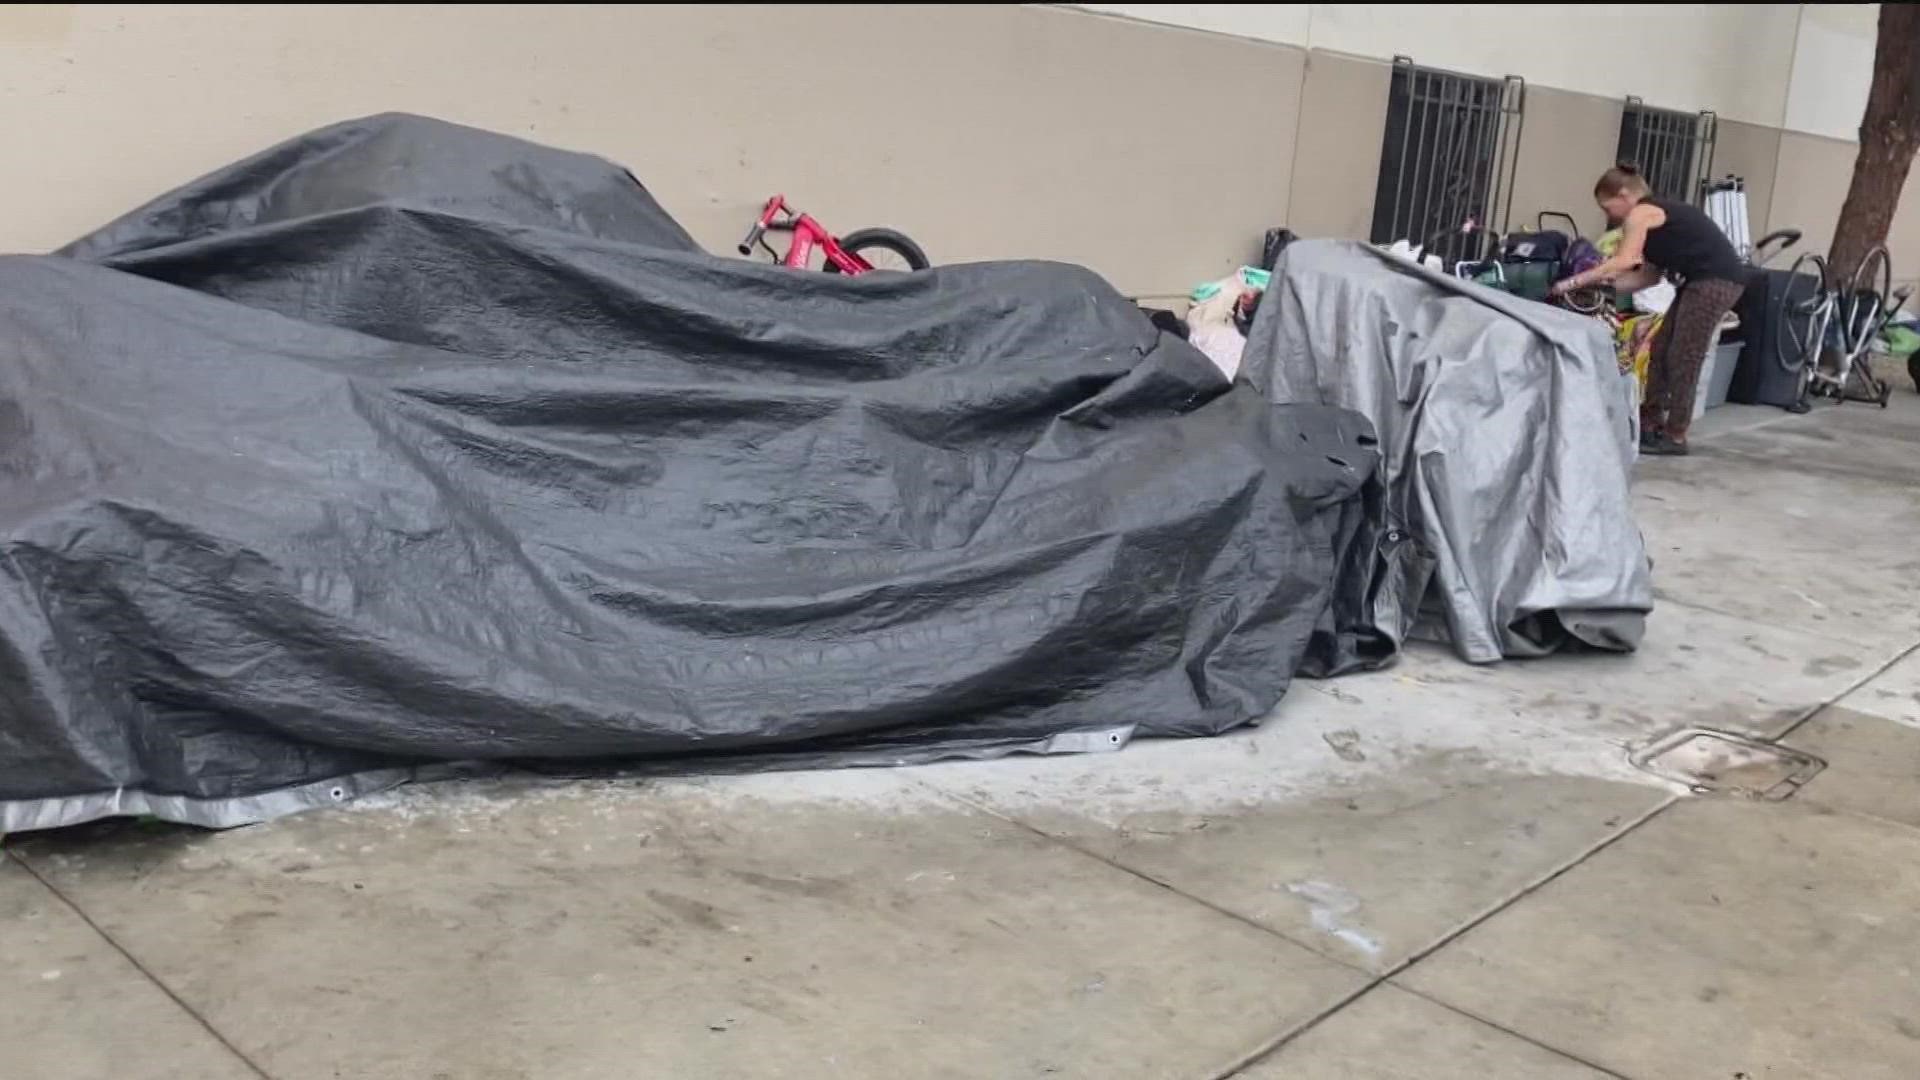 "The city is constantly refining our approach to the unsheltered community trying everything we can to get folks to accept shelter," said Mayor Todd Gloria.